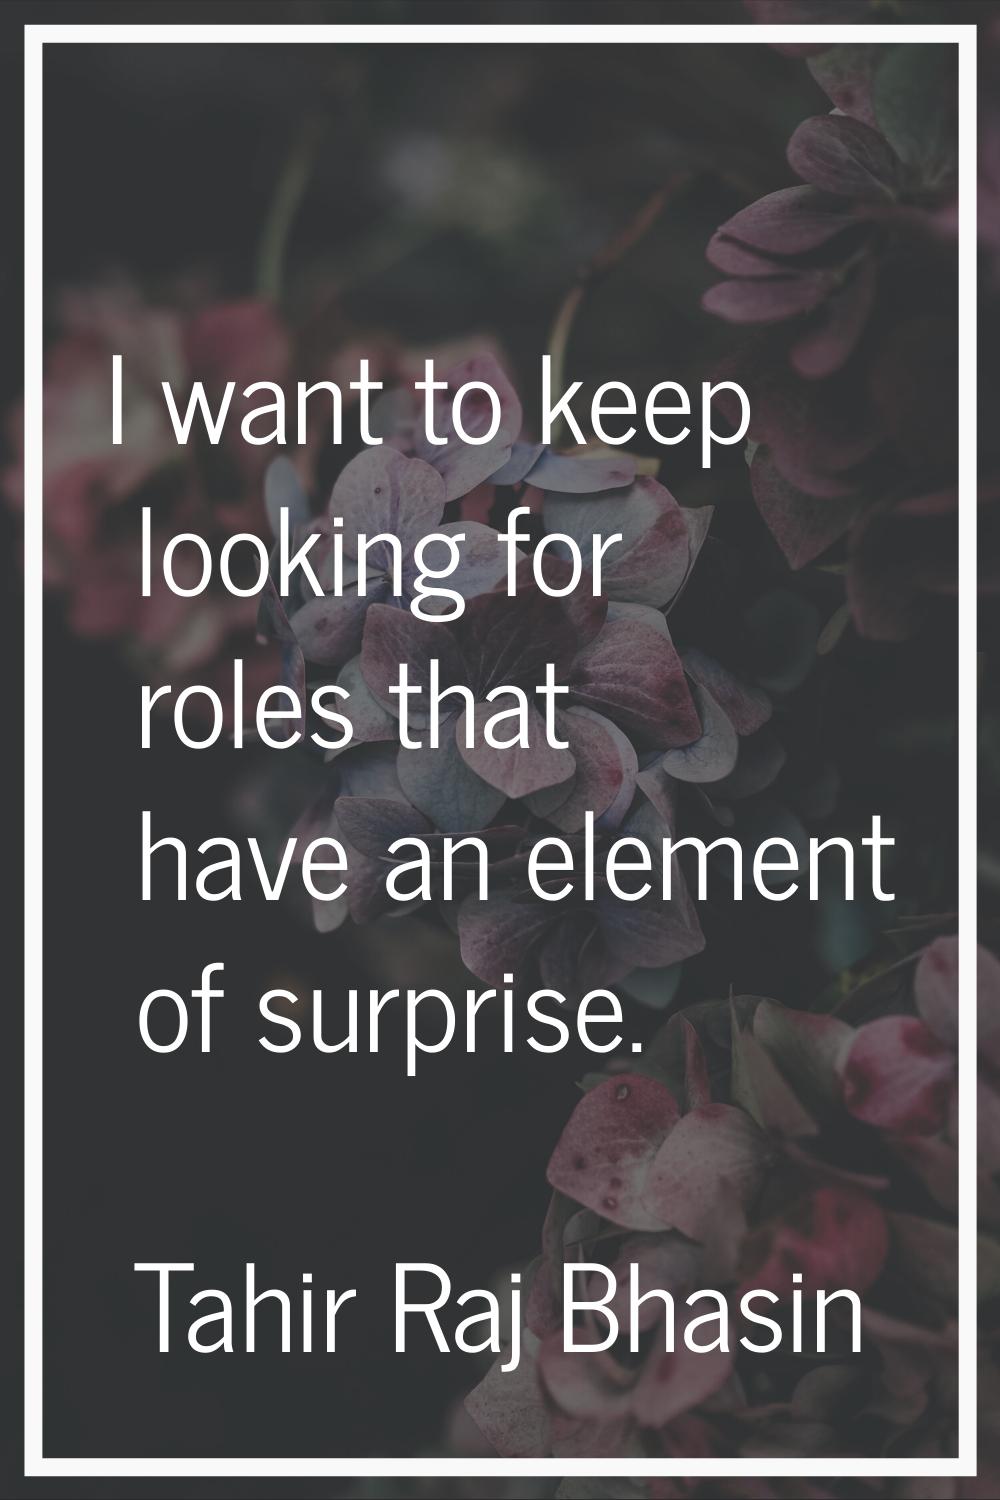 I want to keep looking for roles that have an element of surprise.